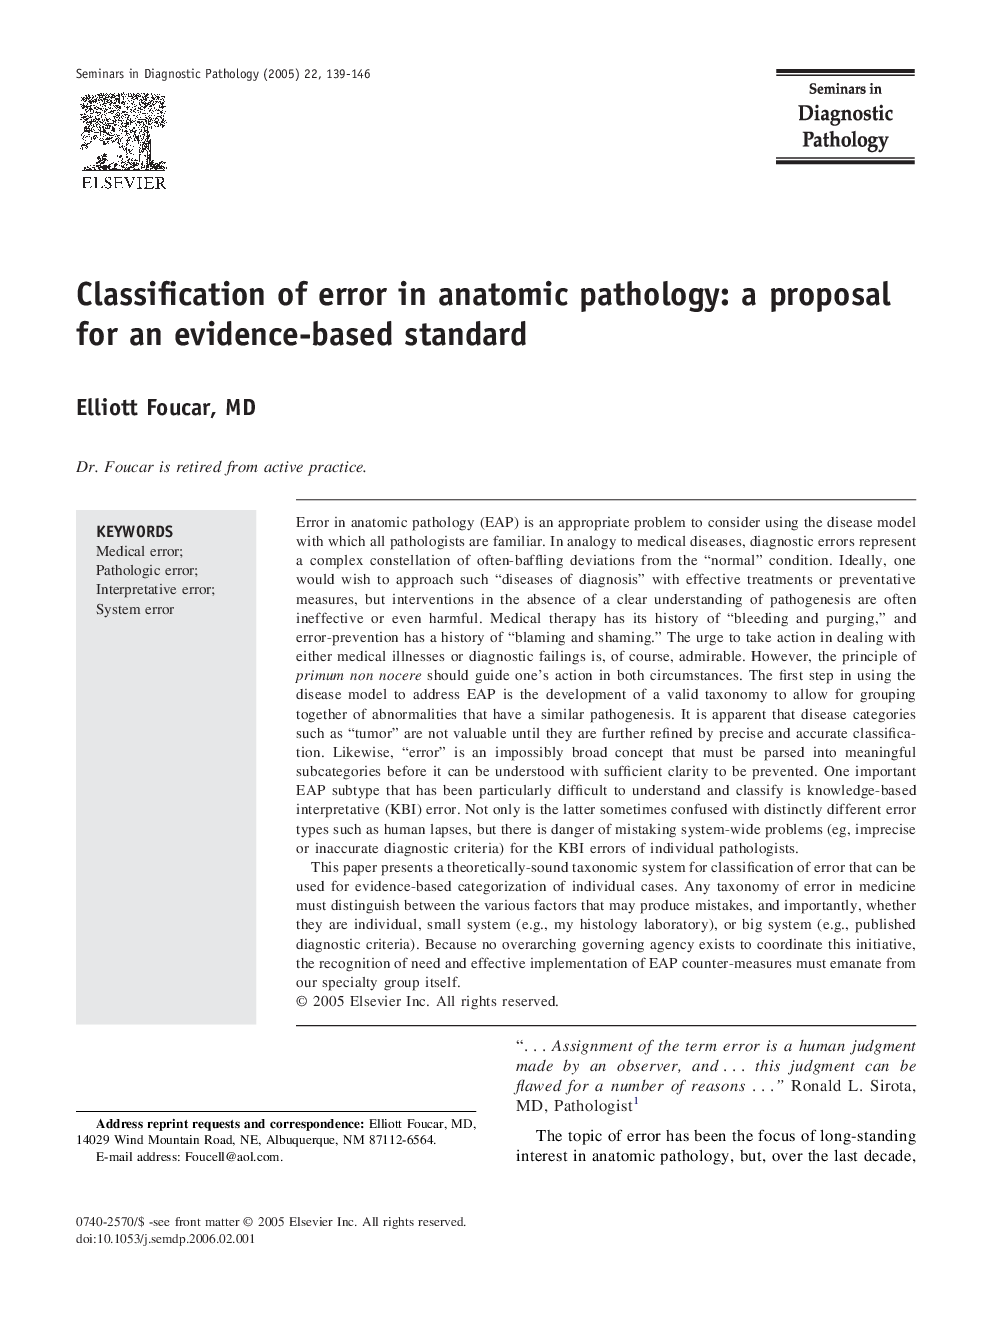 Classification of error in anatomic pathology: a proposal for an evidence-based standard